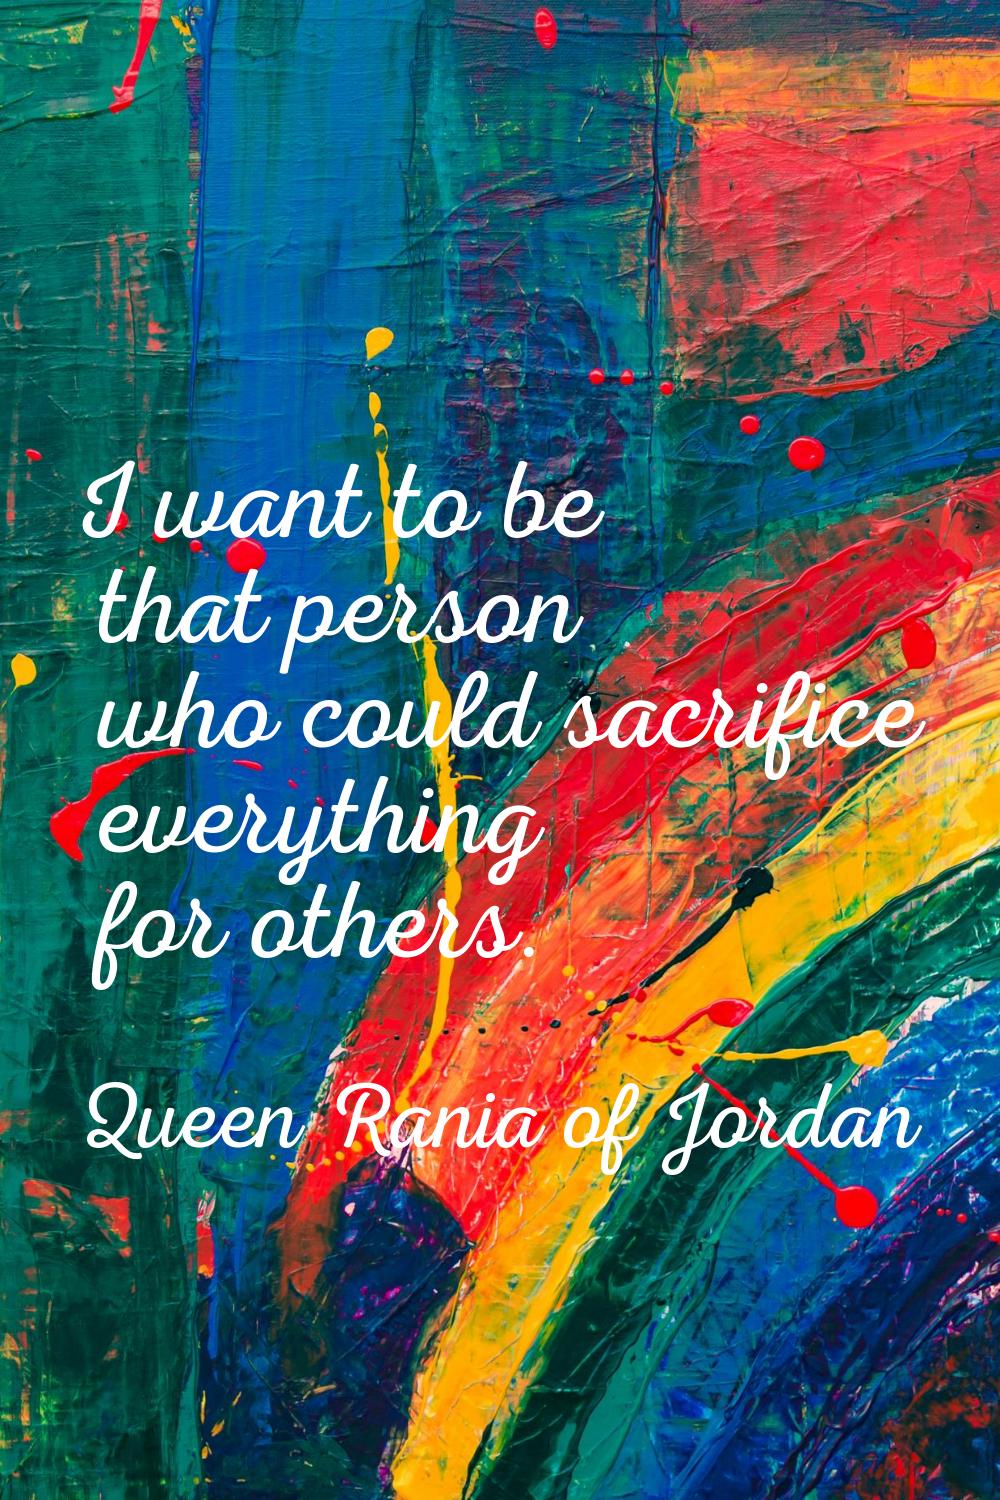 I want to be that person who could sacrifice everything for others.